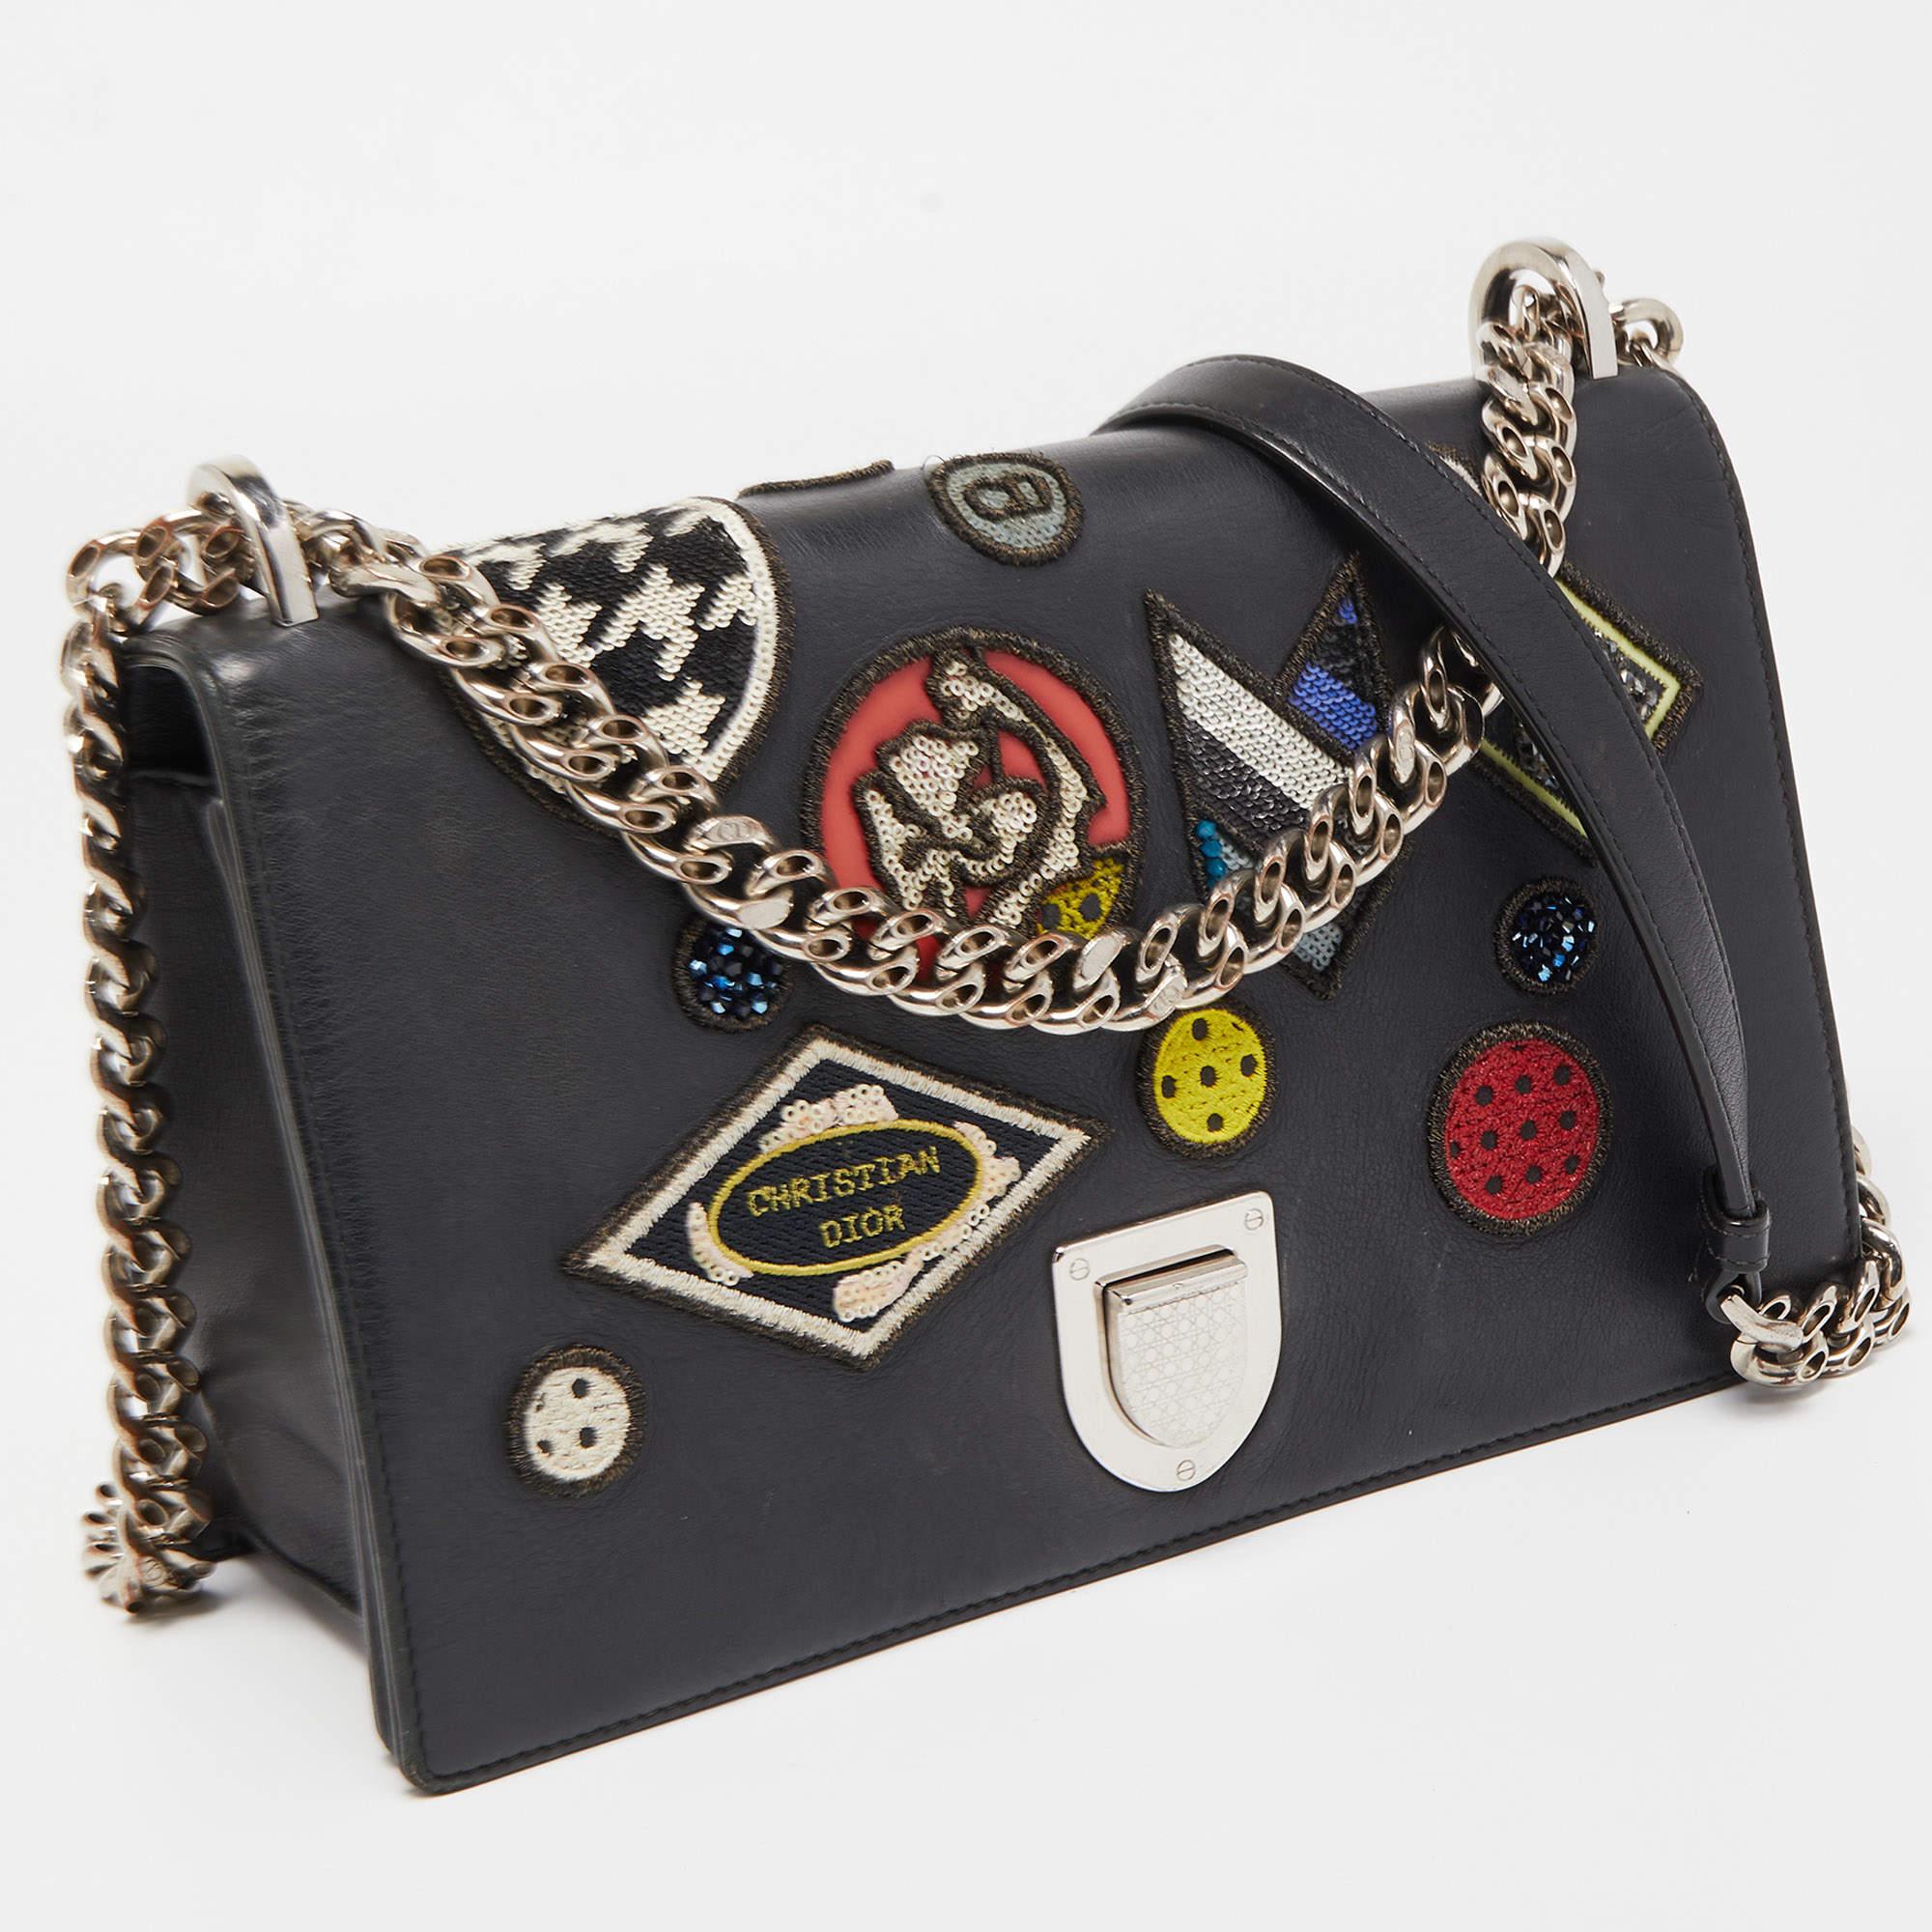 This Dior Diorama bag for women is an example of the brand's fine designs that are skillfully crafted to project a classic charm. It is a functional creation with an elevating appeal.

